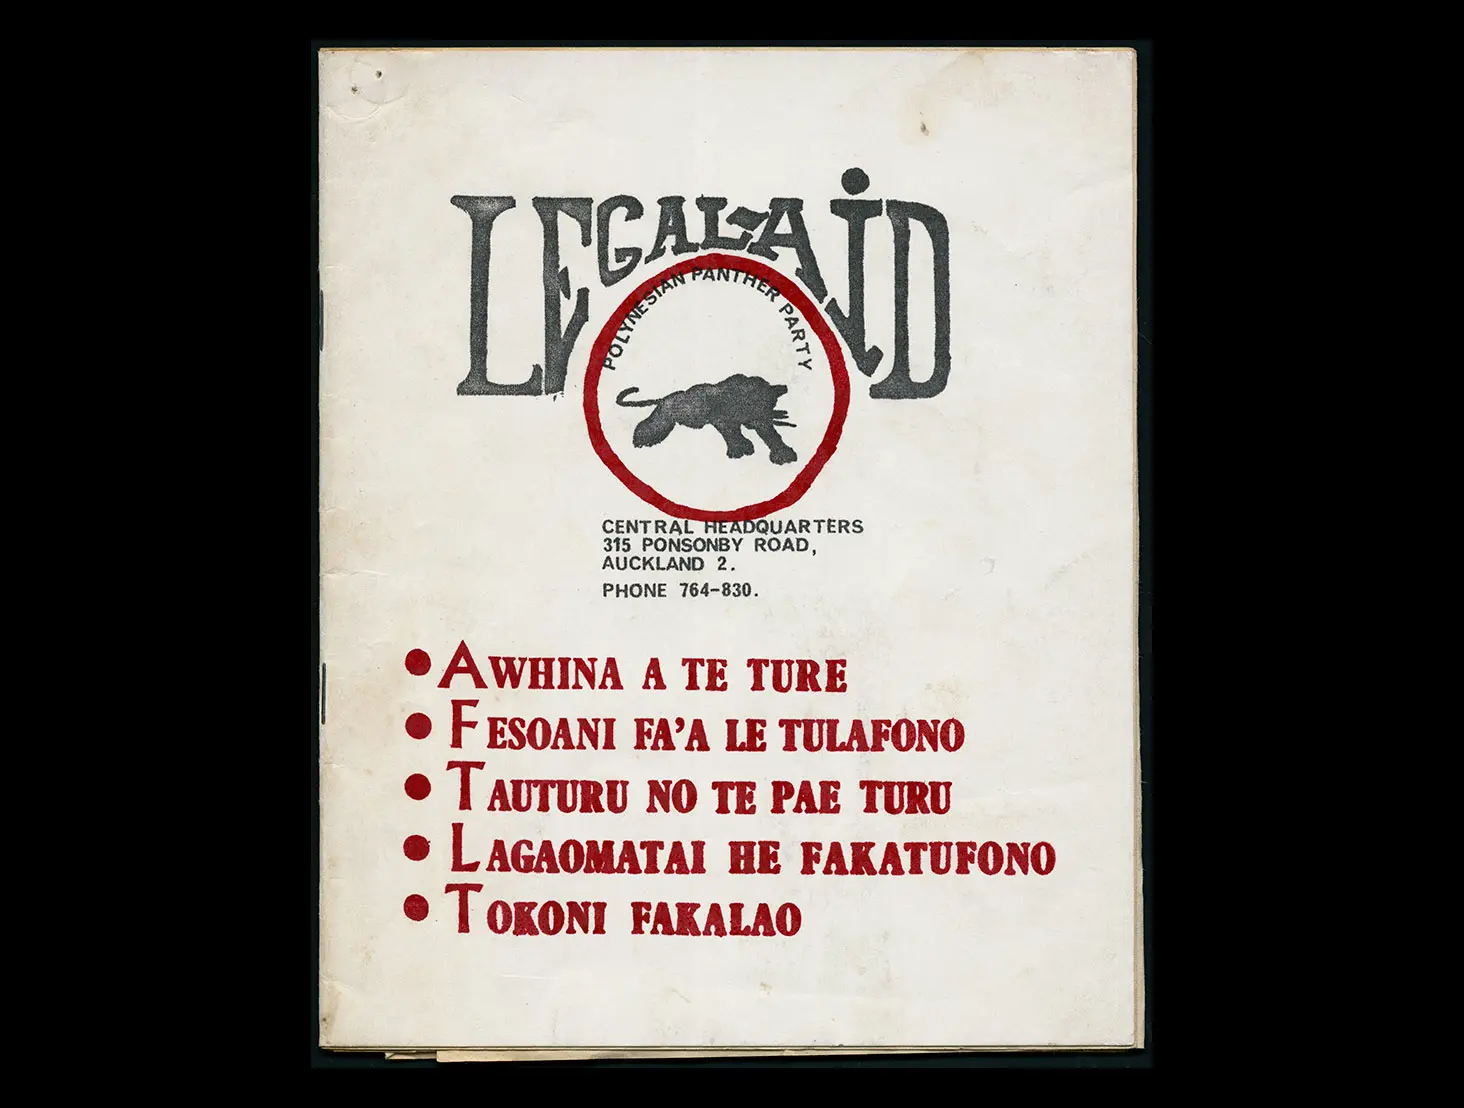 Colour photo showing the cover of a legal aid booklet for the Polynesian Panther Party. It shows their logo (a black panther) and headings in different Pacific languages such as 'Awhina a te ture'.